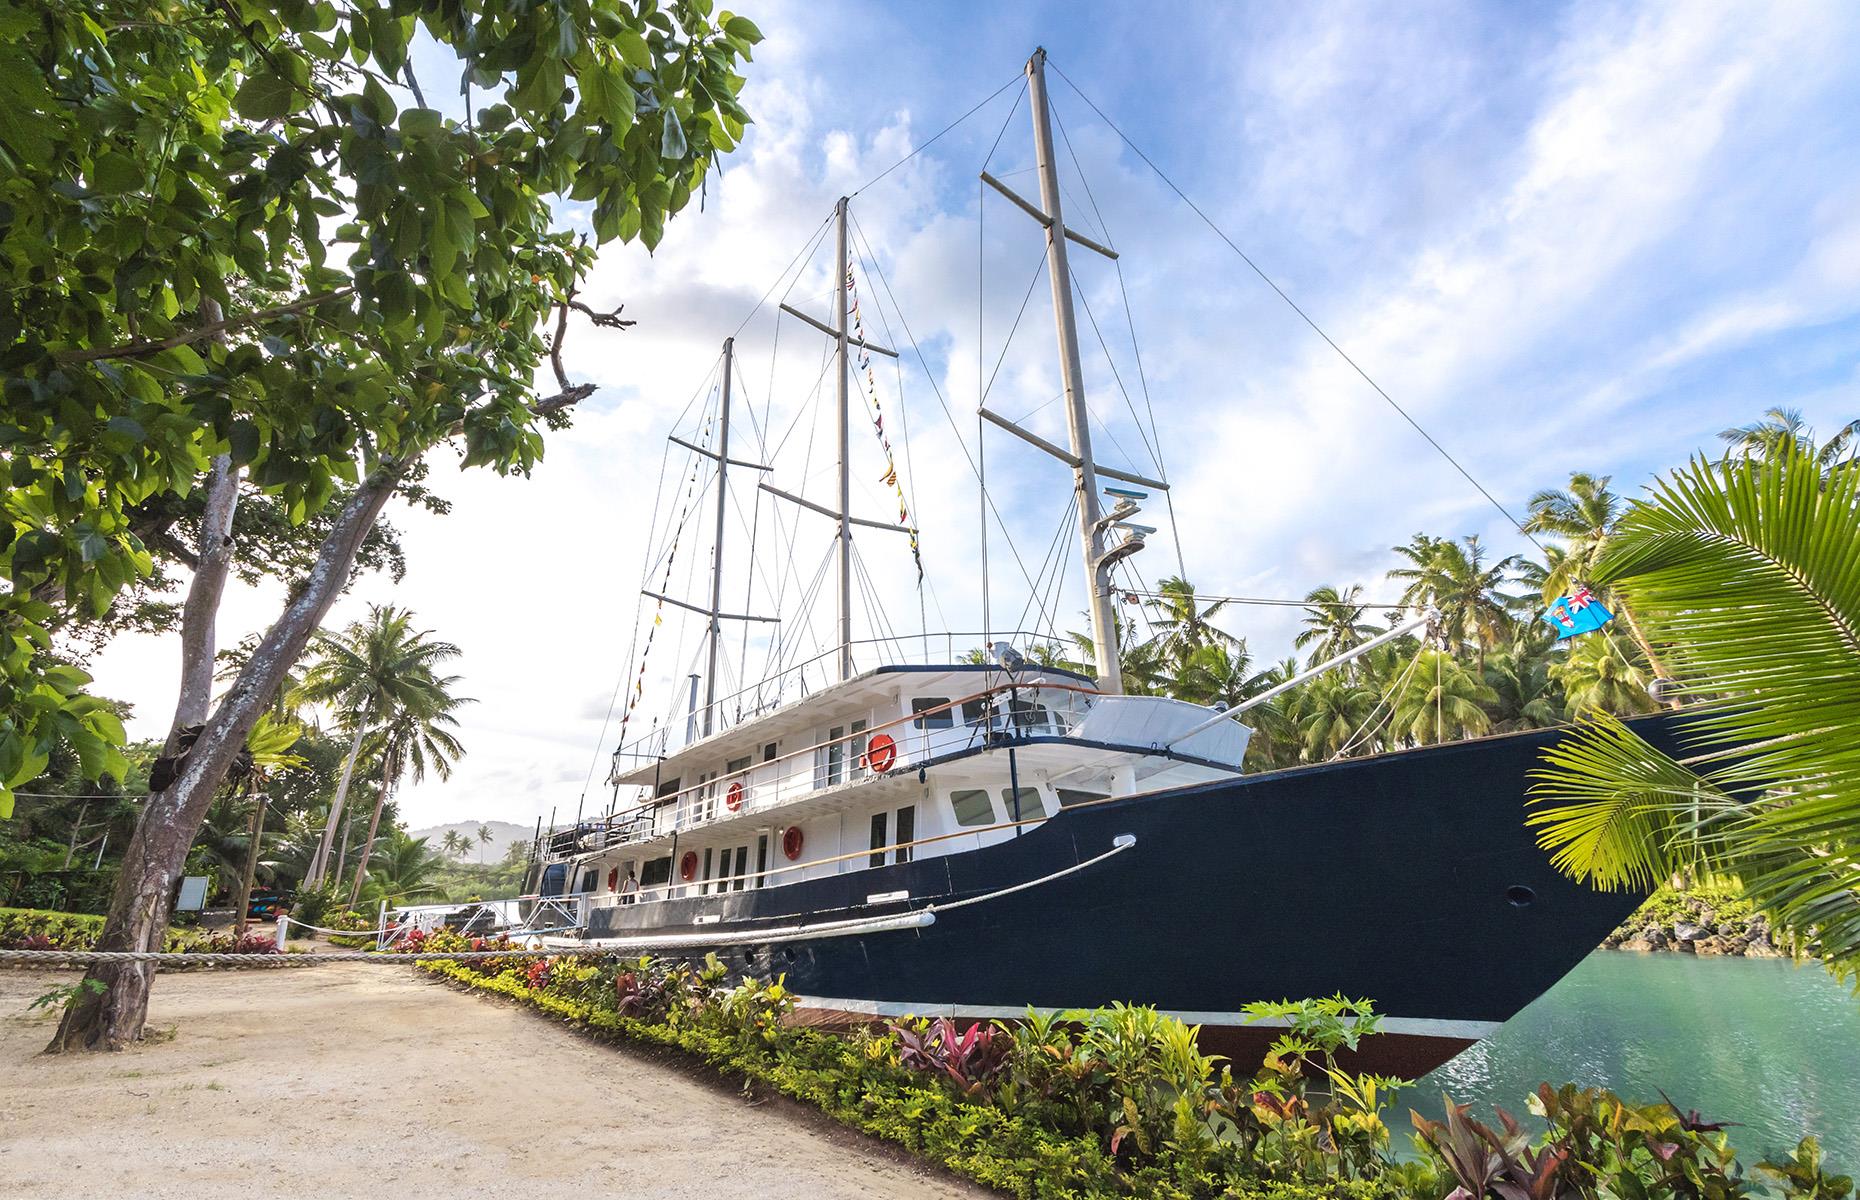 <p>If staying on these paradise islands just isn't cool enough for you, book into <a href="https://www.savasiisland.com/serenity/">Serenity</a> at Savasi Island Resort. This vessel is a 140-foot (43m) schooner moored permanently in the bright blue waters of Savasi Island marina in Savusavu, northern Fiji. There are five staterooms onboard, each with wonderfully light, minimalist decor, as well as a cinema room and restaurant.</p>